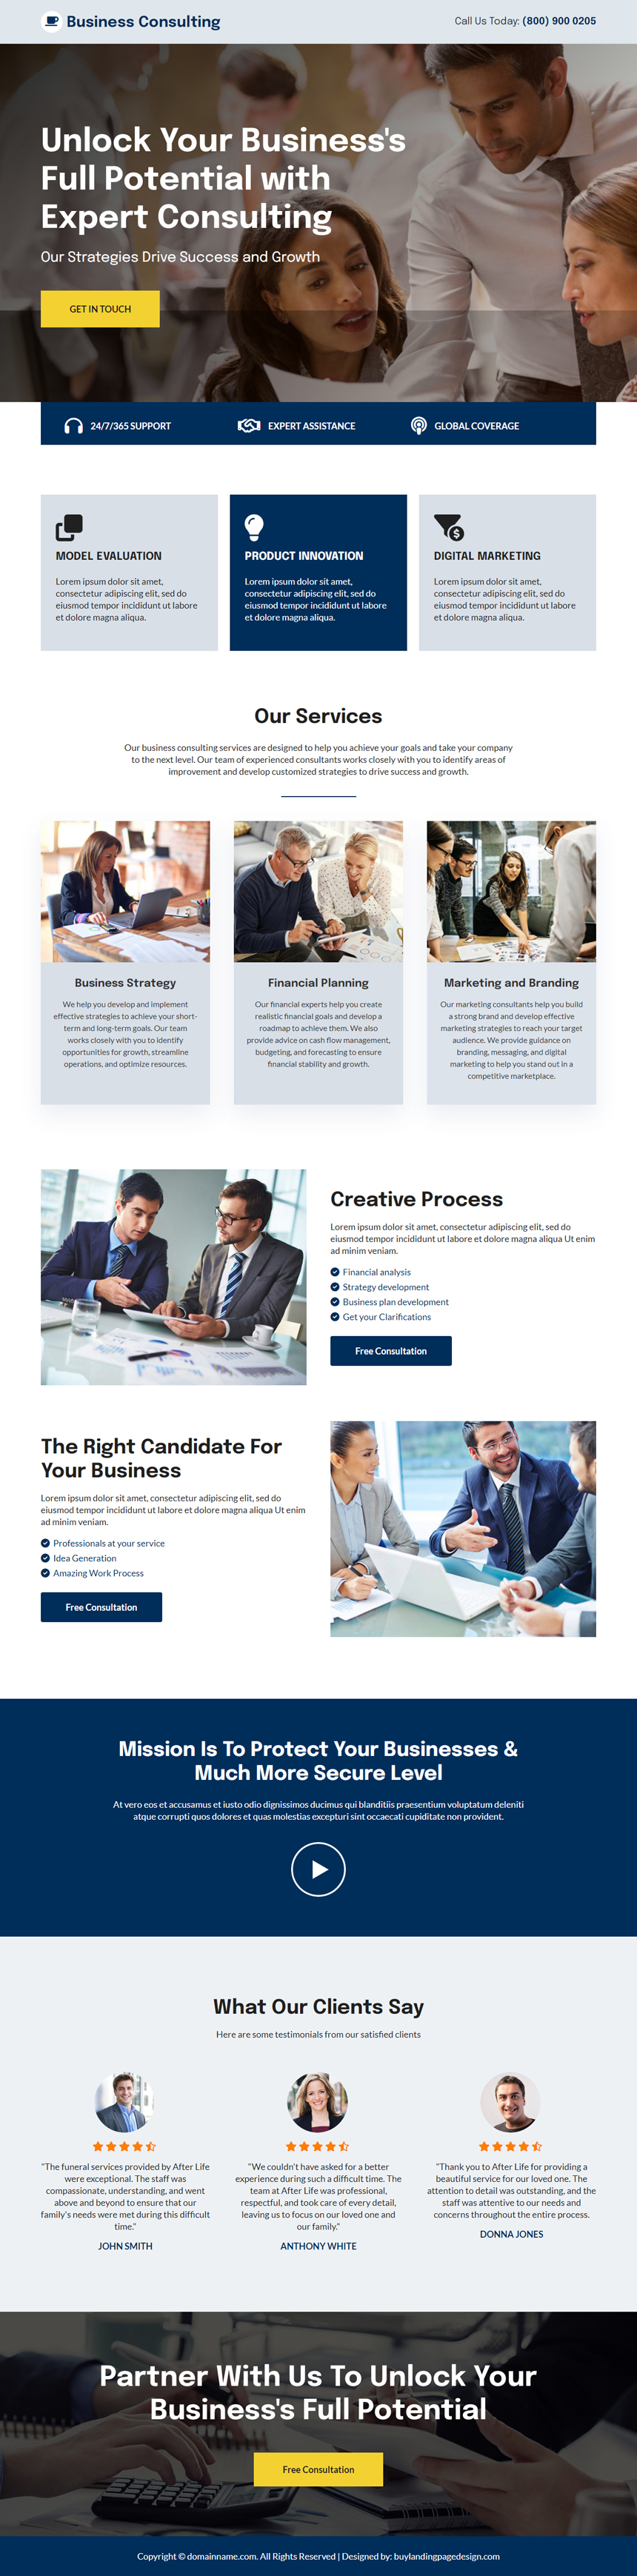 expert business consulting responsive landing page